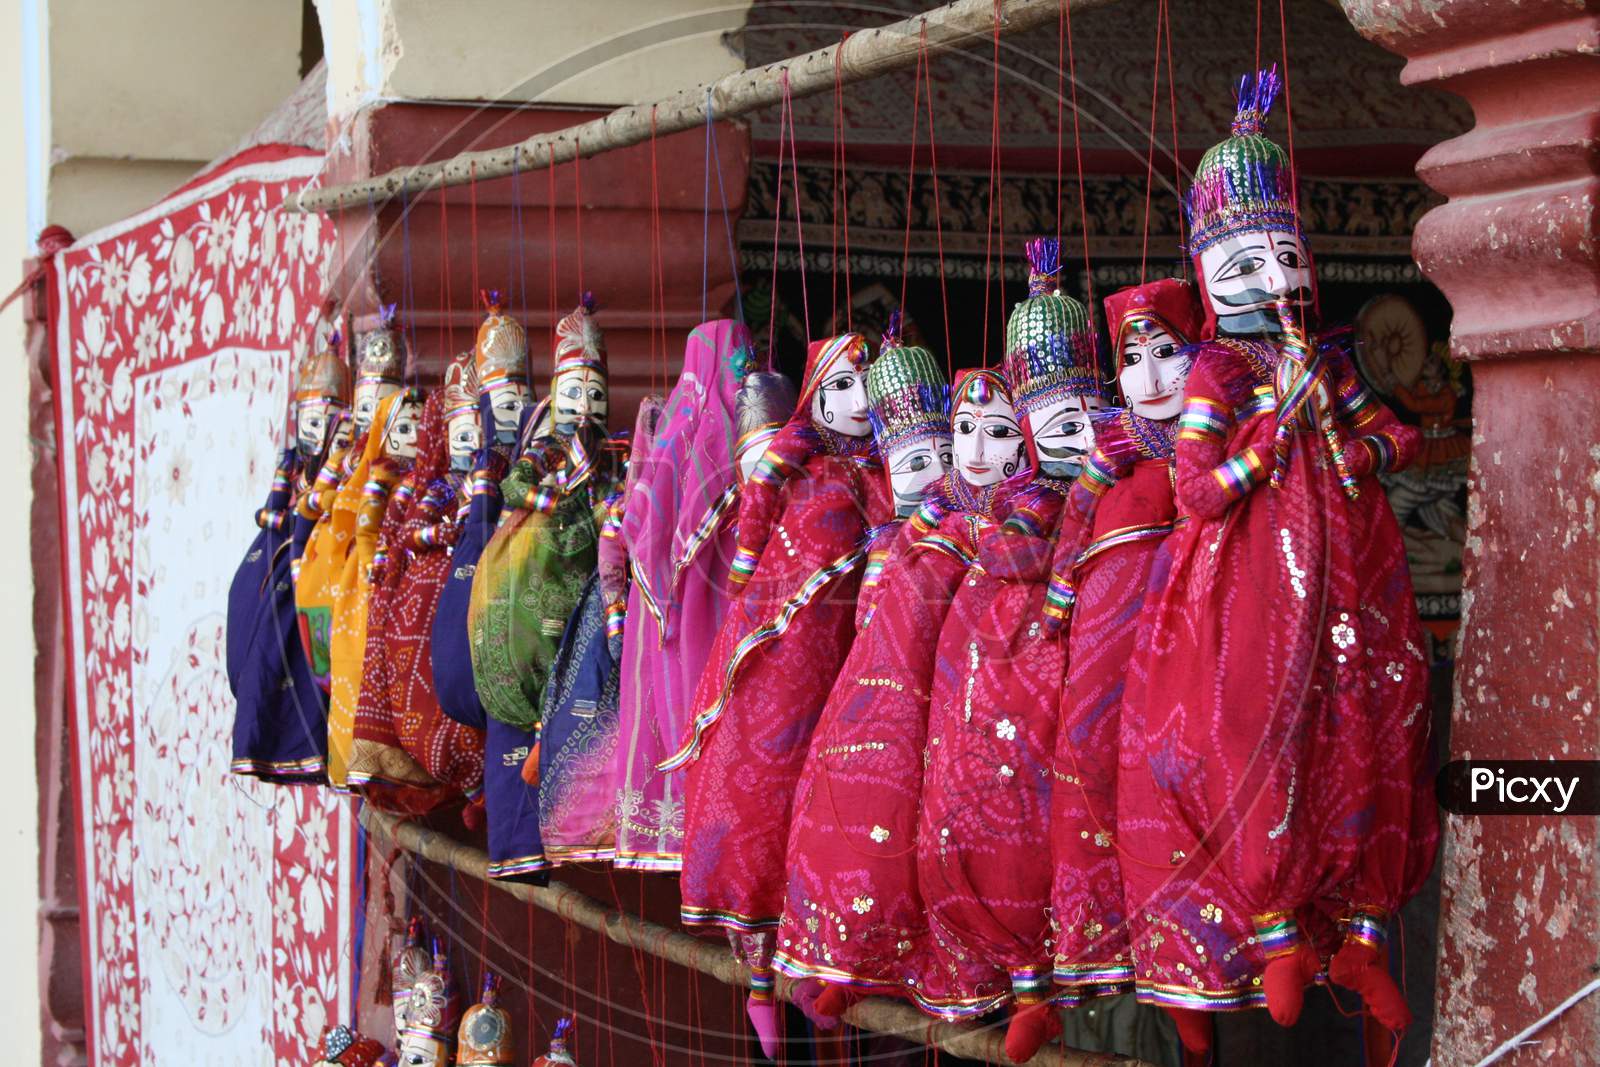 Puppets of Rajasthan